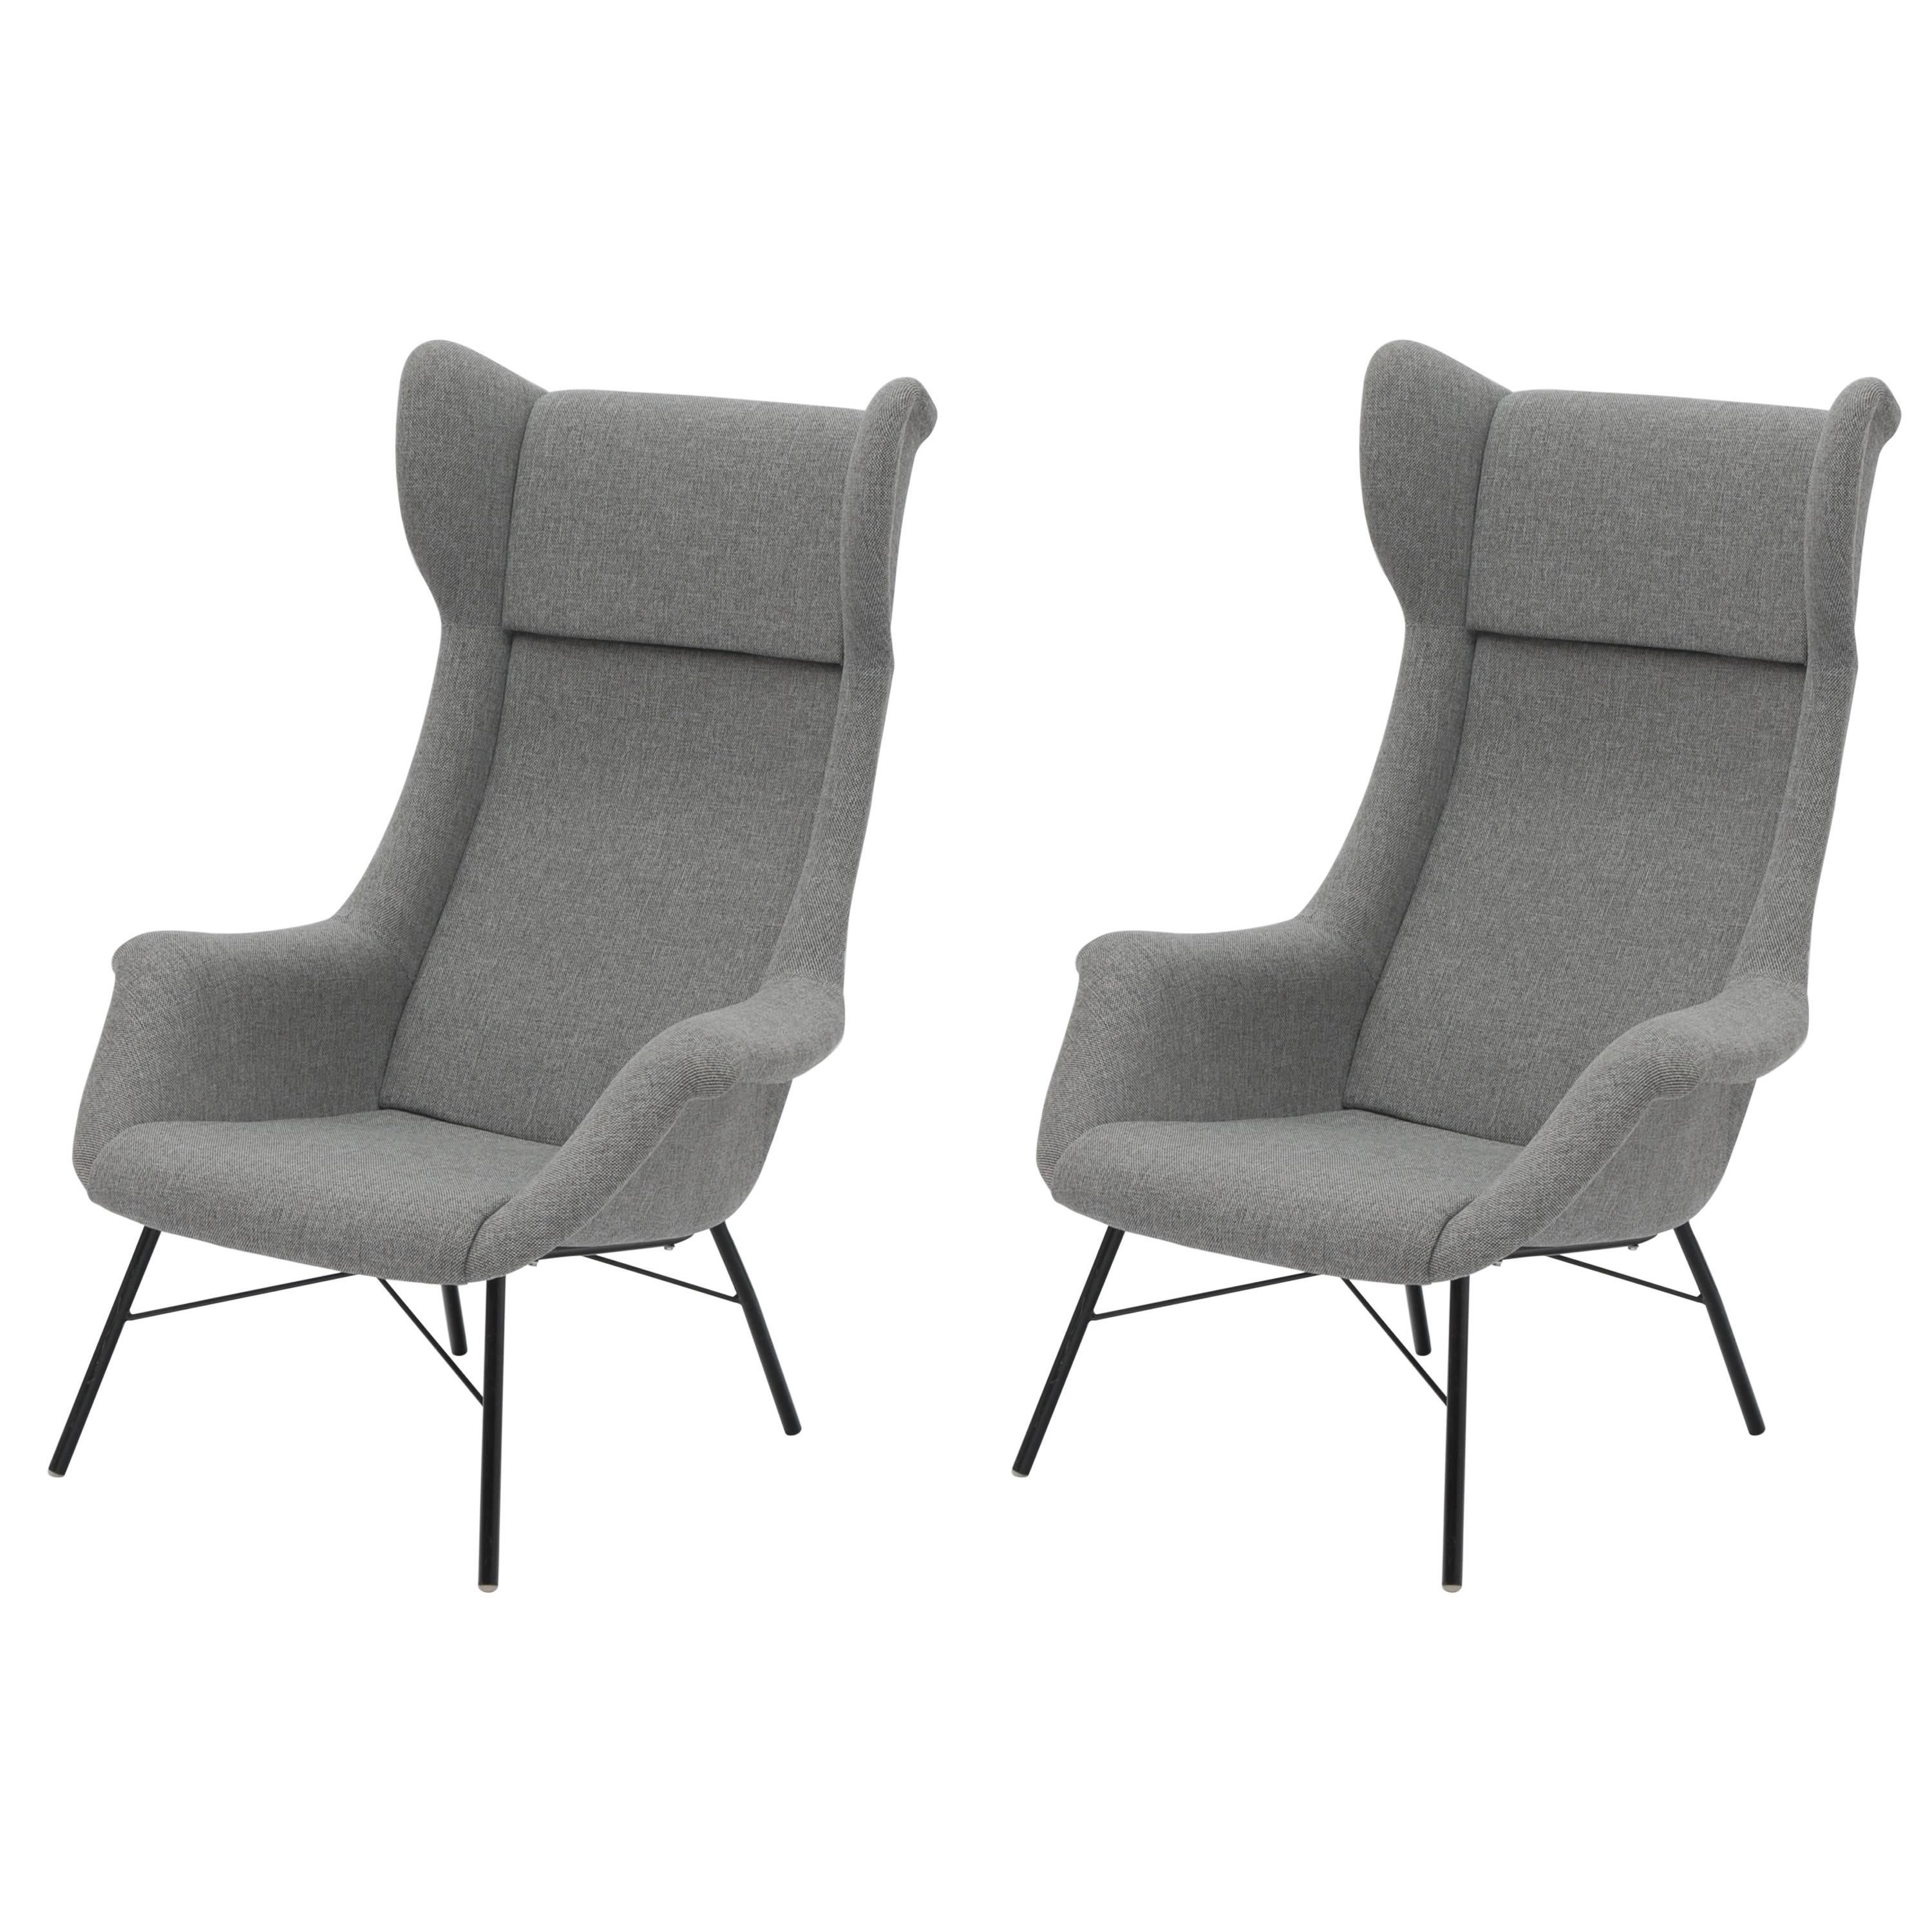 Pair of Wingback Chairs by Miroslav Navratil, Czechoslovakia, 1960 For Sale